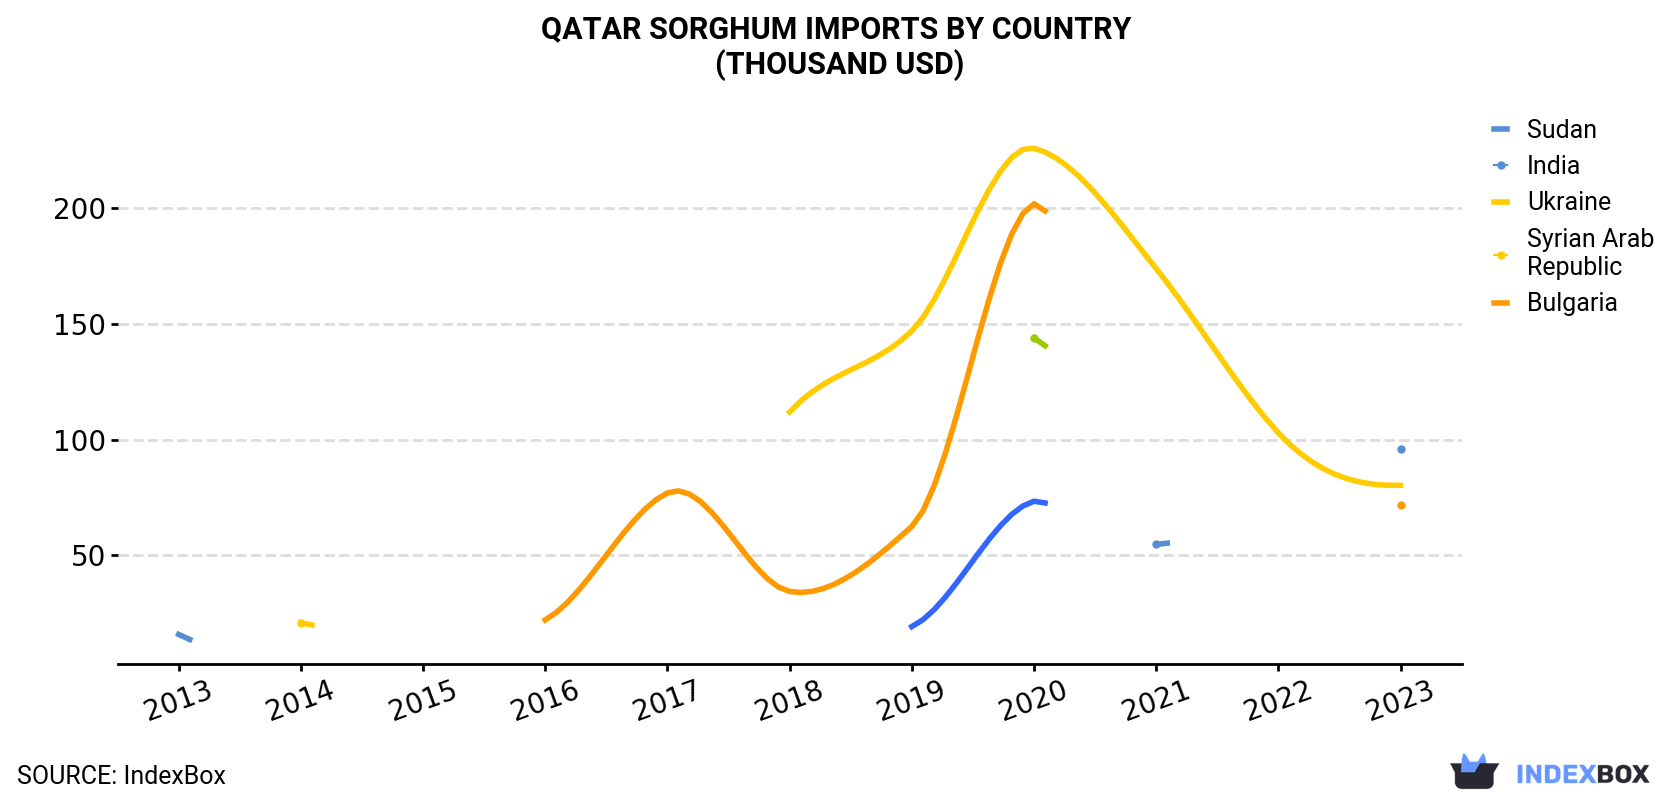 Qatar Sorghum Imports By Country (Thousand USD)